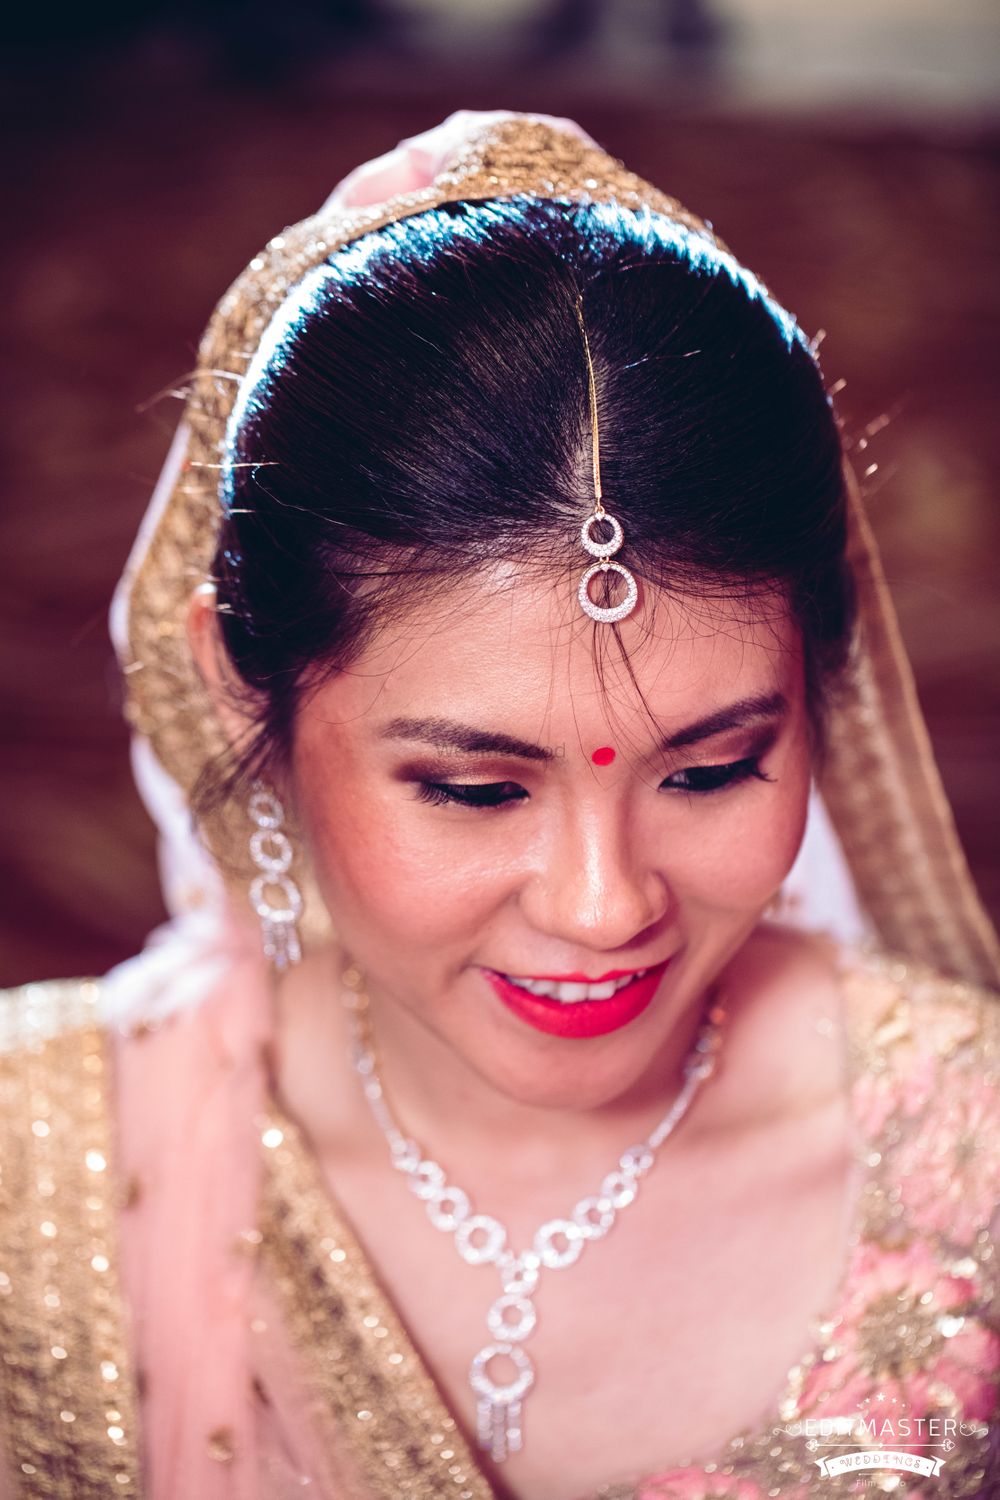 Photo From My Singaporean Bride - By Editmaster Studios